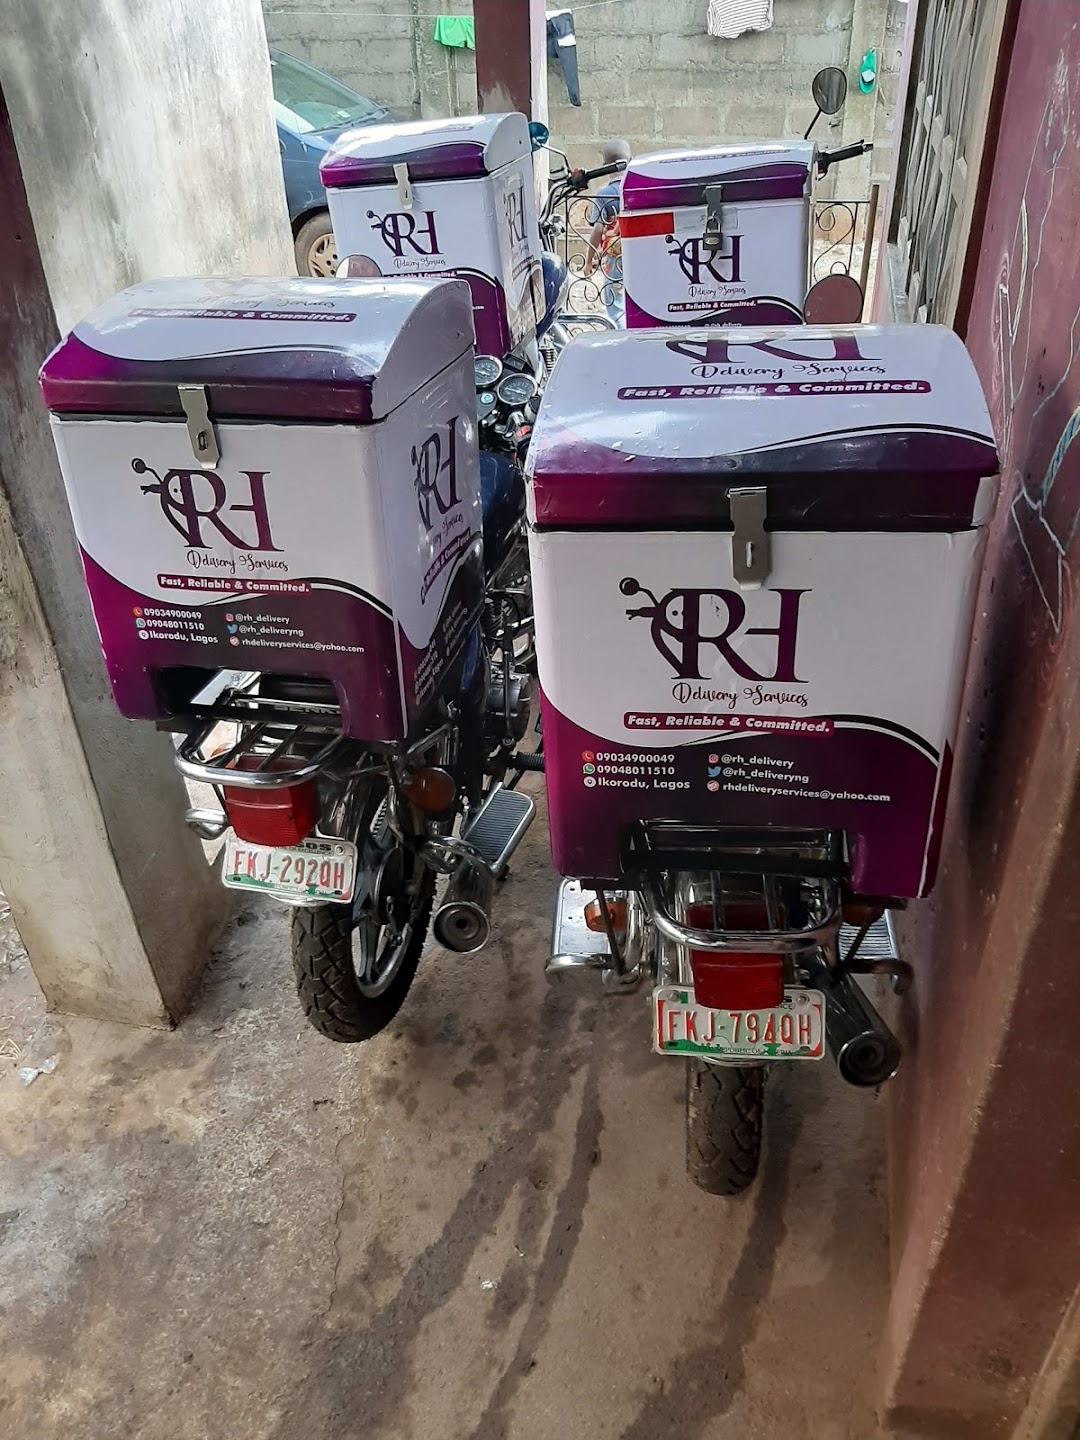 Rh delivery